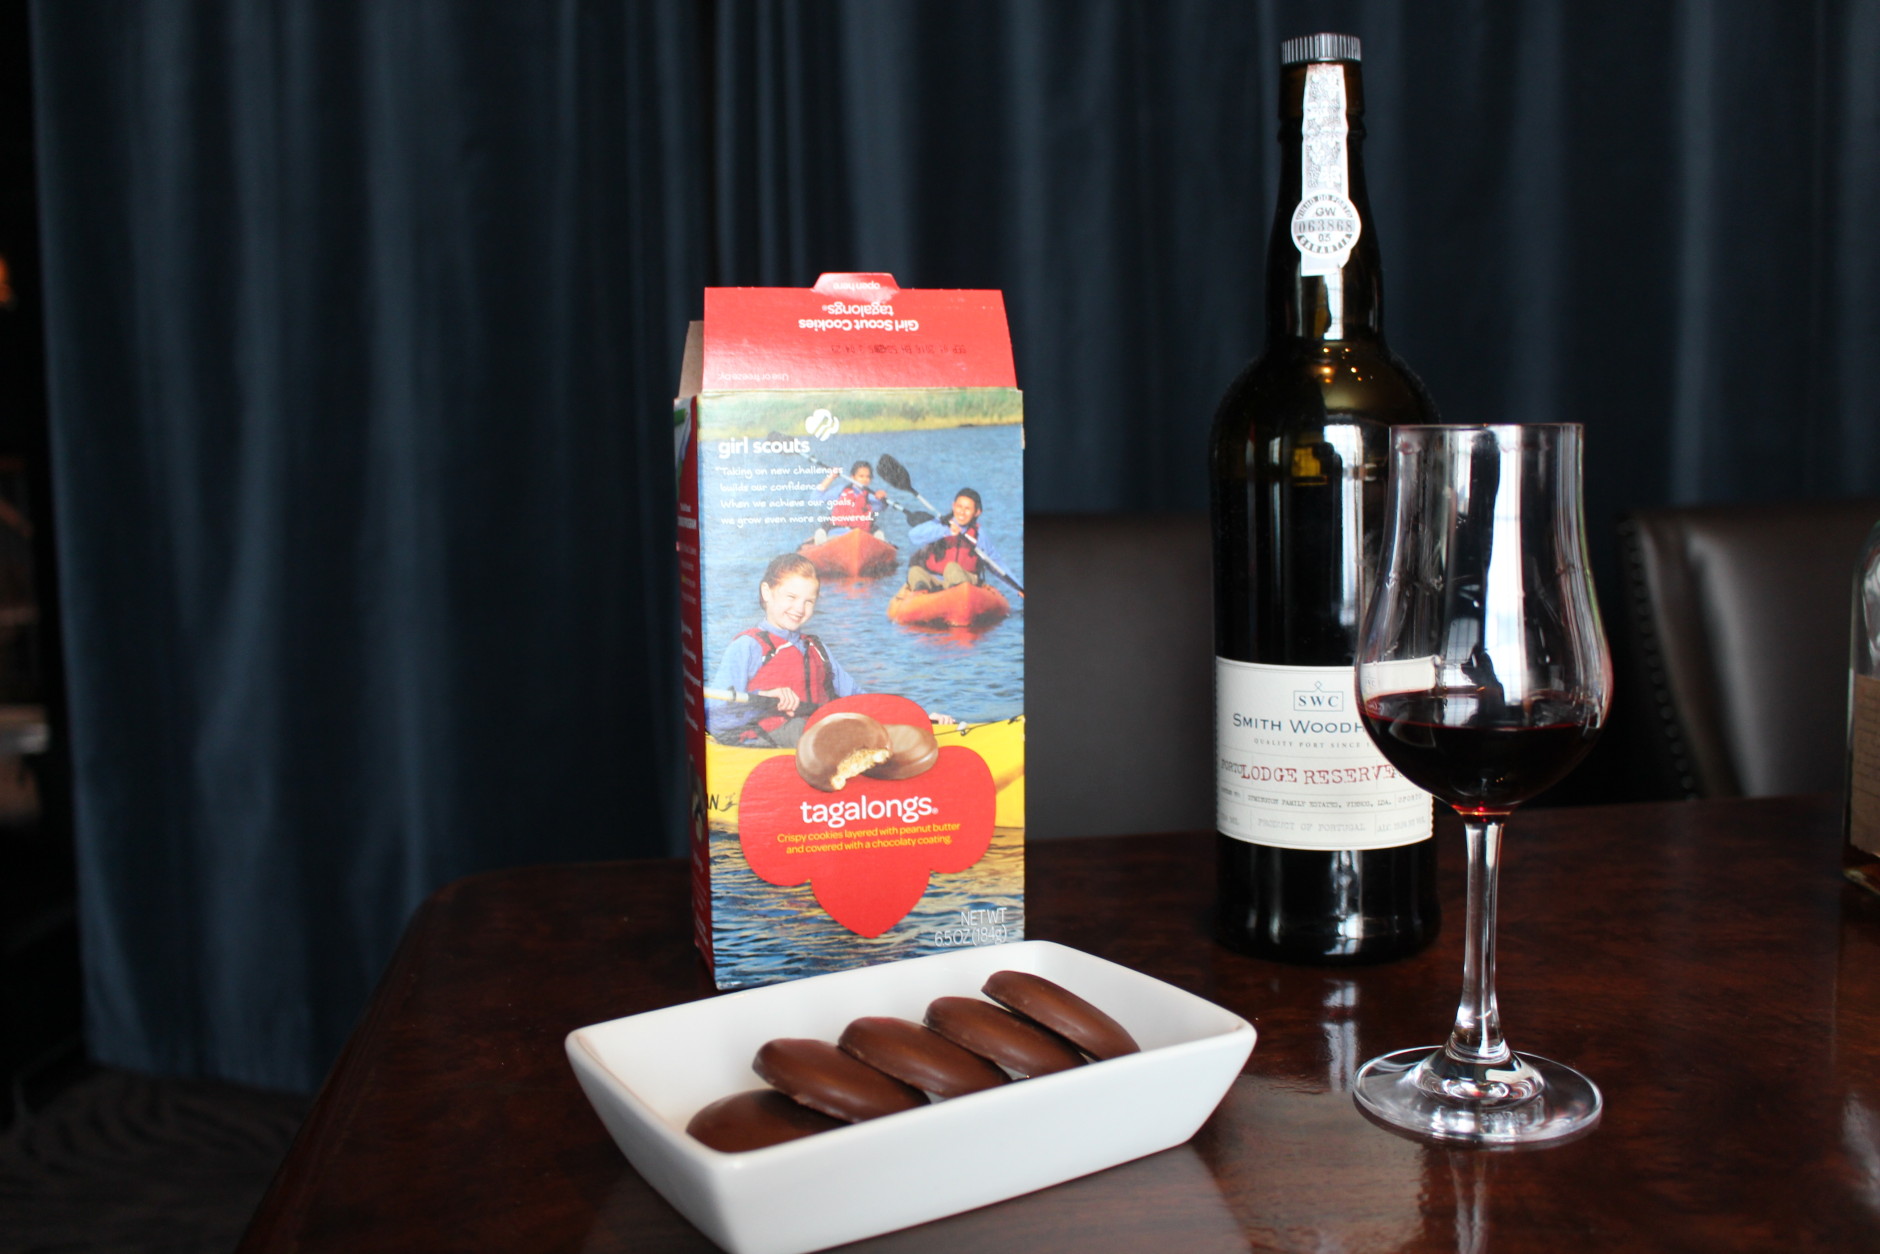 Peanut Butter Patties paired with Smith Woodhouse Lodge Reserve Port. (WTOP/Dana Gooley)